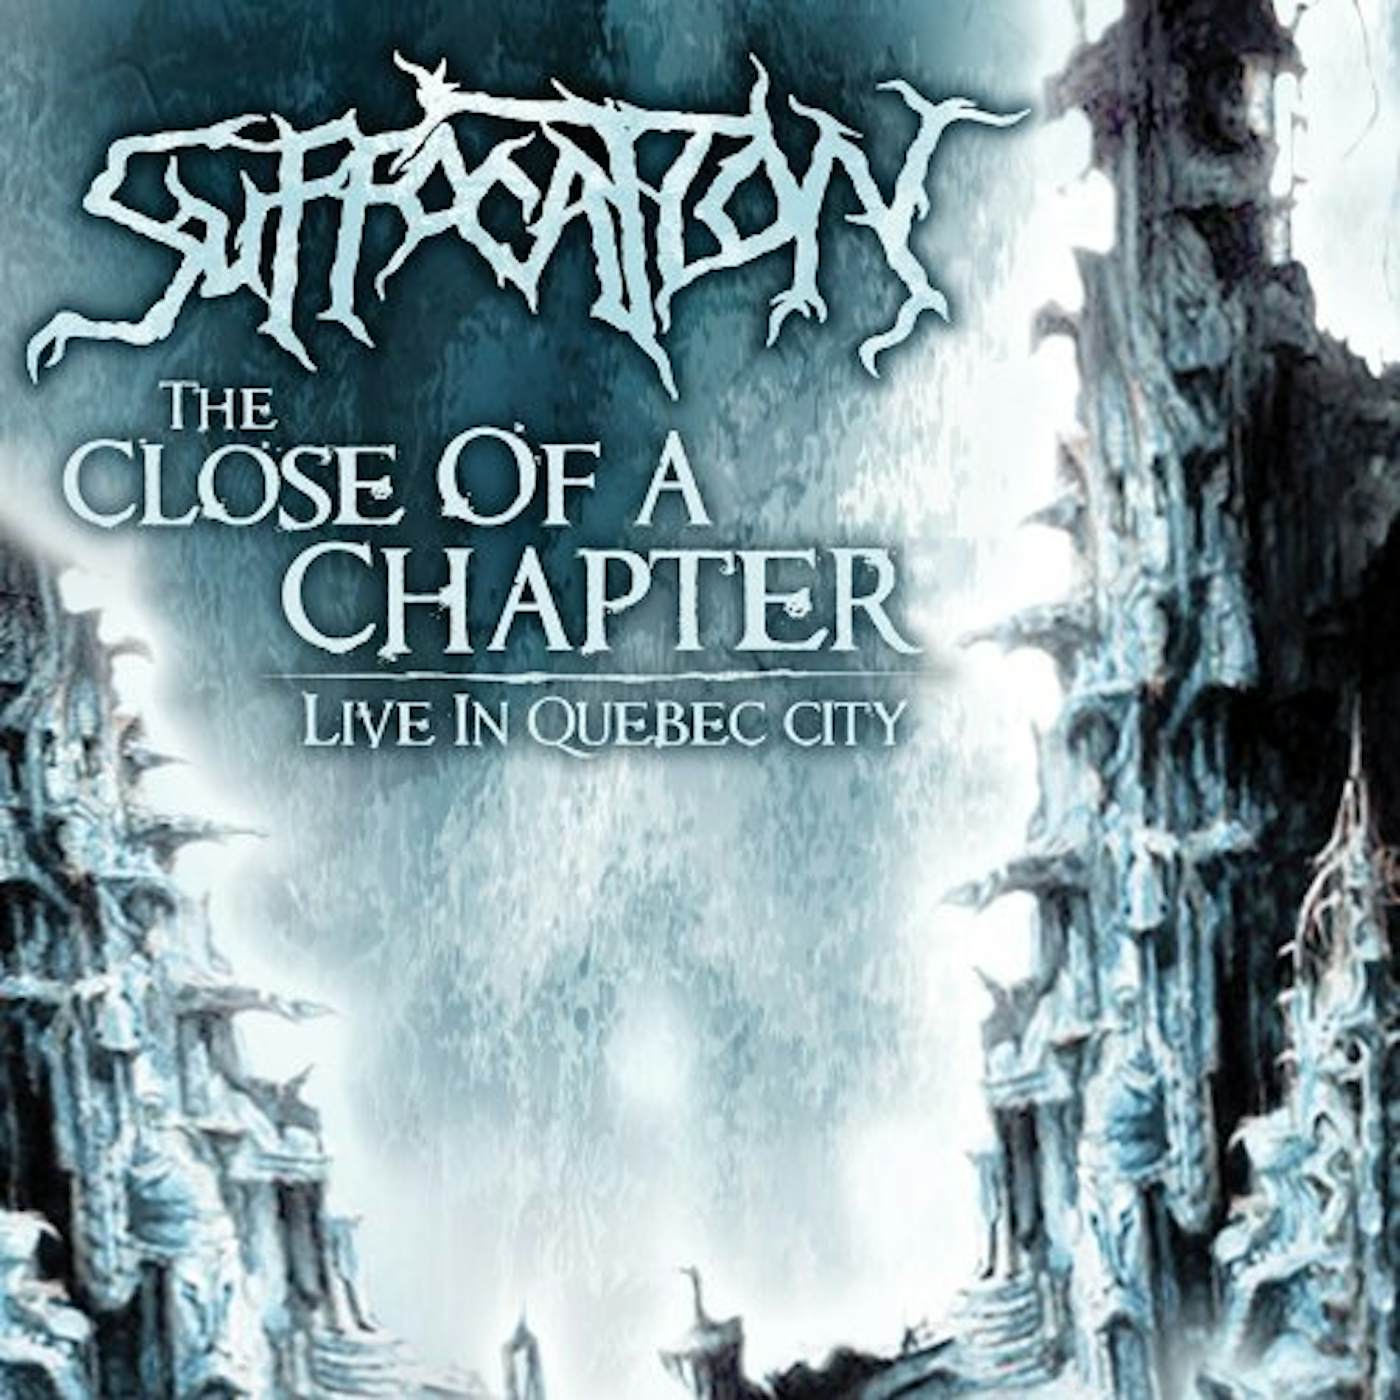 Suffocation CLOSE OF A CHAPTER CD